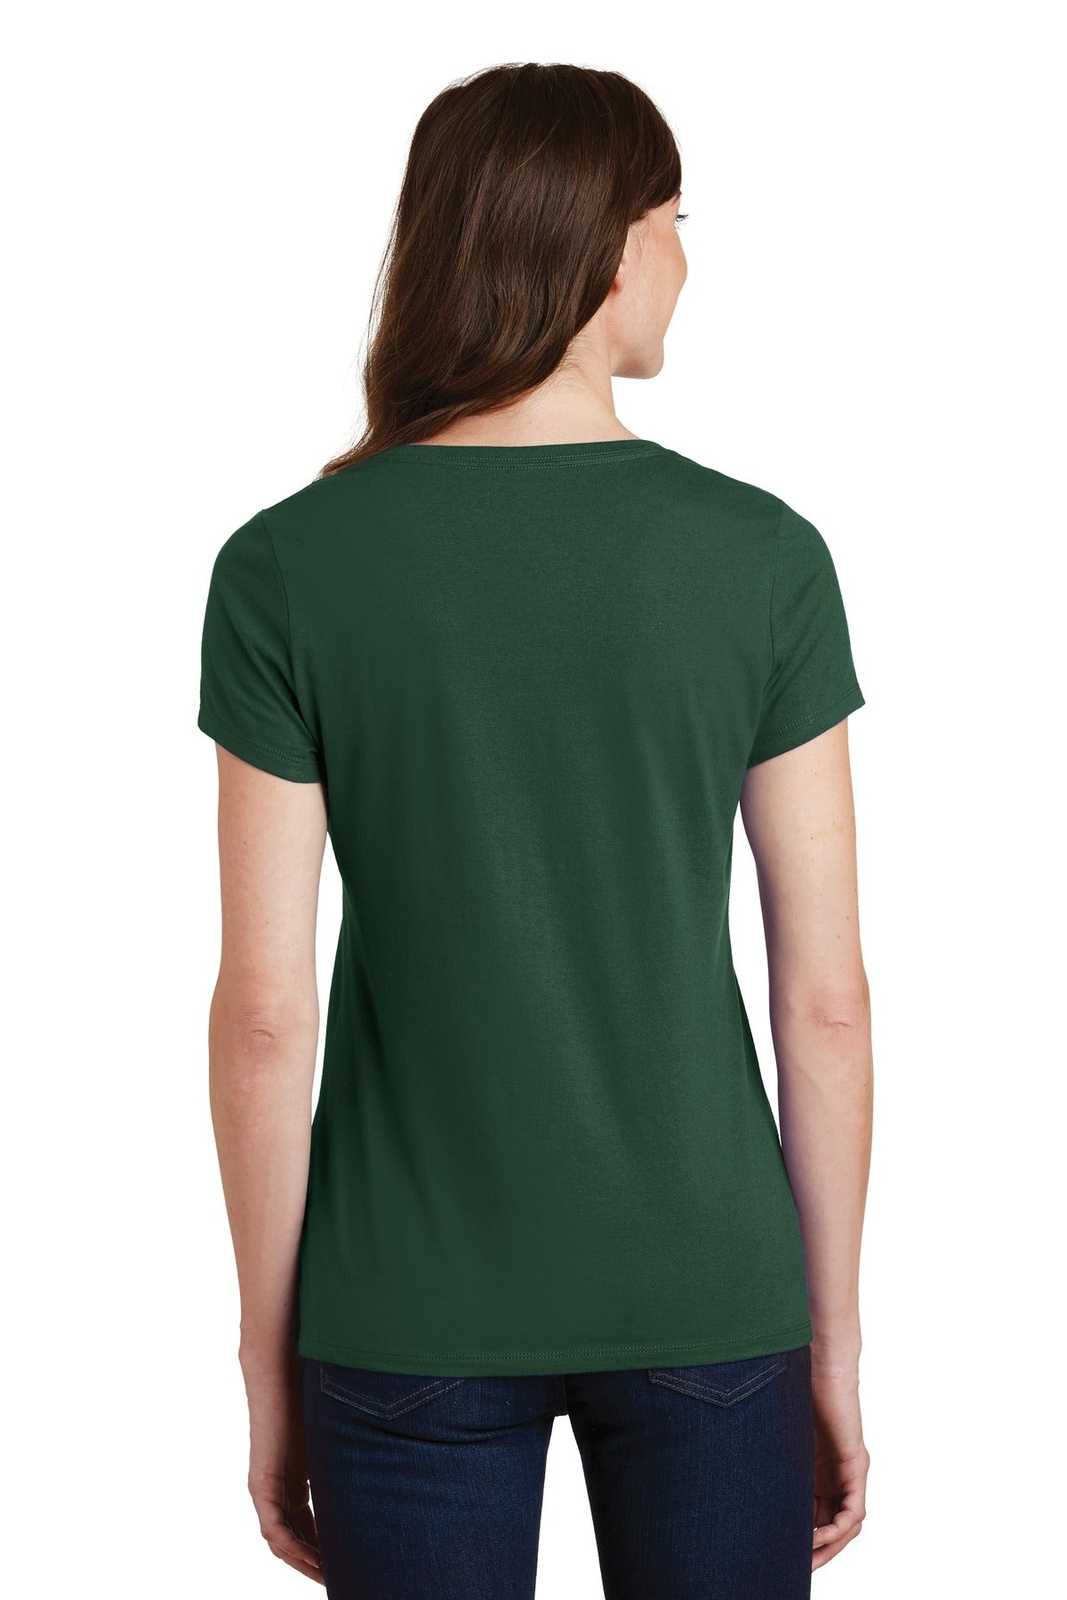 Port &amp; Company LPC450V Ladies Fan Favorite V-Neck Tee - Forest Green - HIT a Double - 2